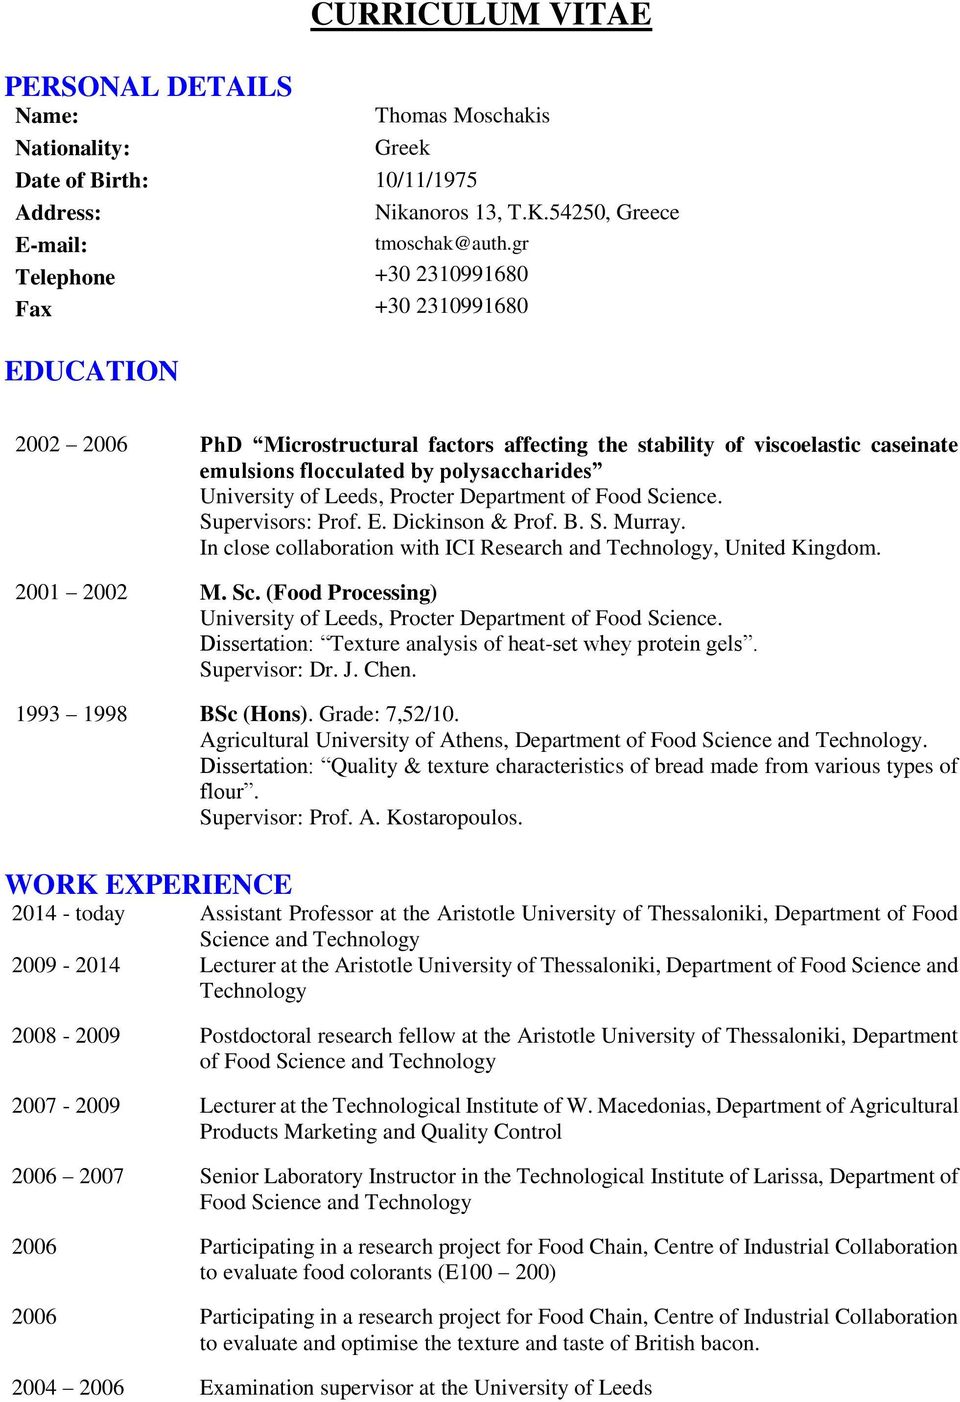 Procter Department of Food Science. Supervisors: Prof. E. Dickinson & Prof. B. S. Murray. In close collaboration with ICI Research and Technology, United Kingdom. 2001 2002 M. Sc. (Food Processing) University of Leeds, Procter Department of Food Science.